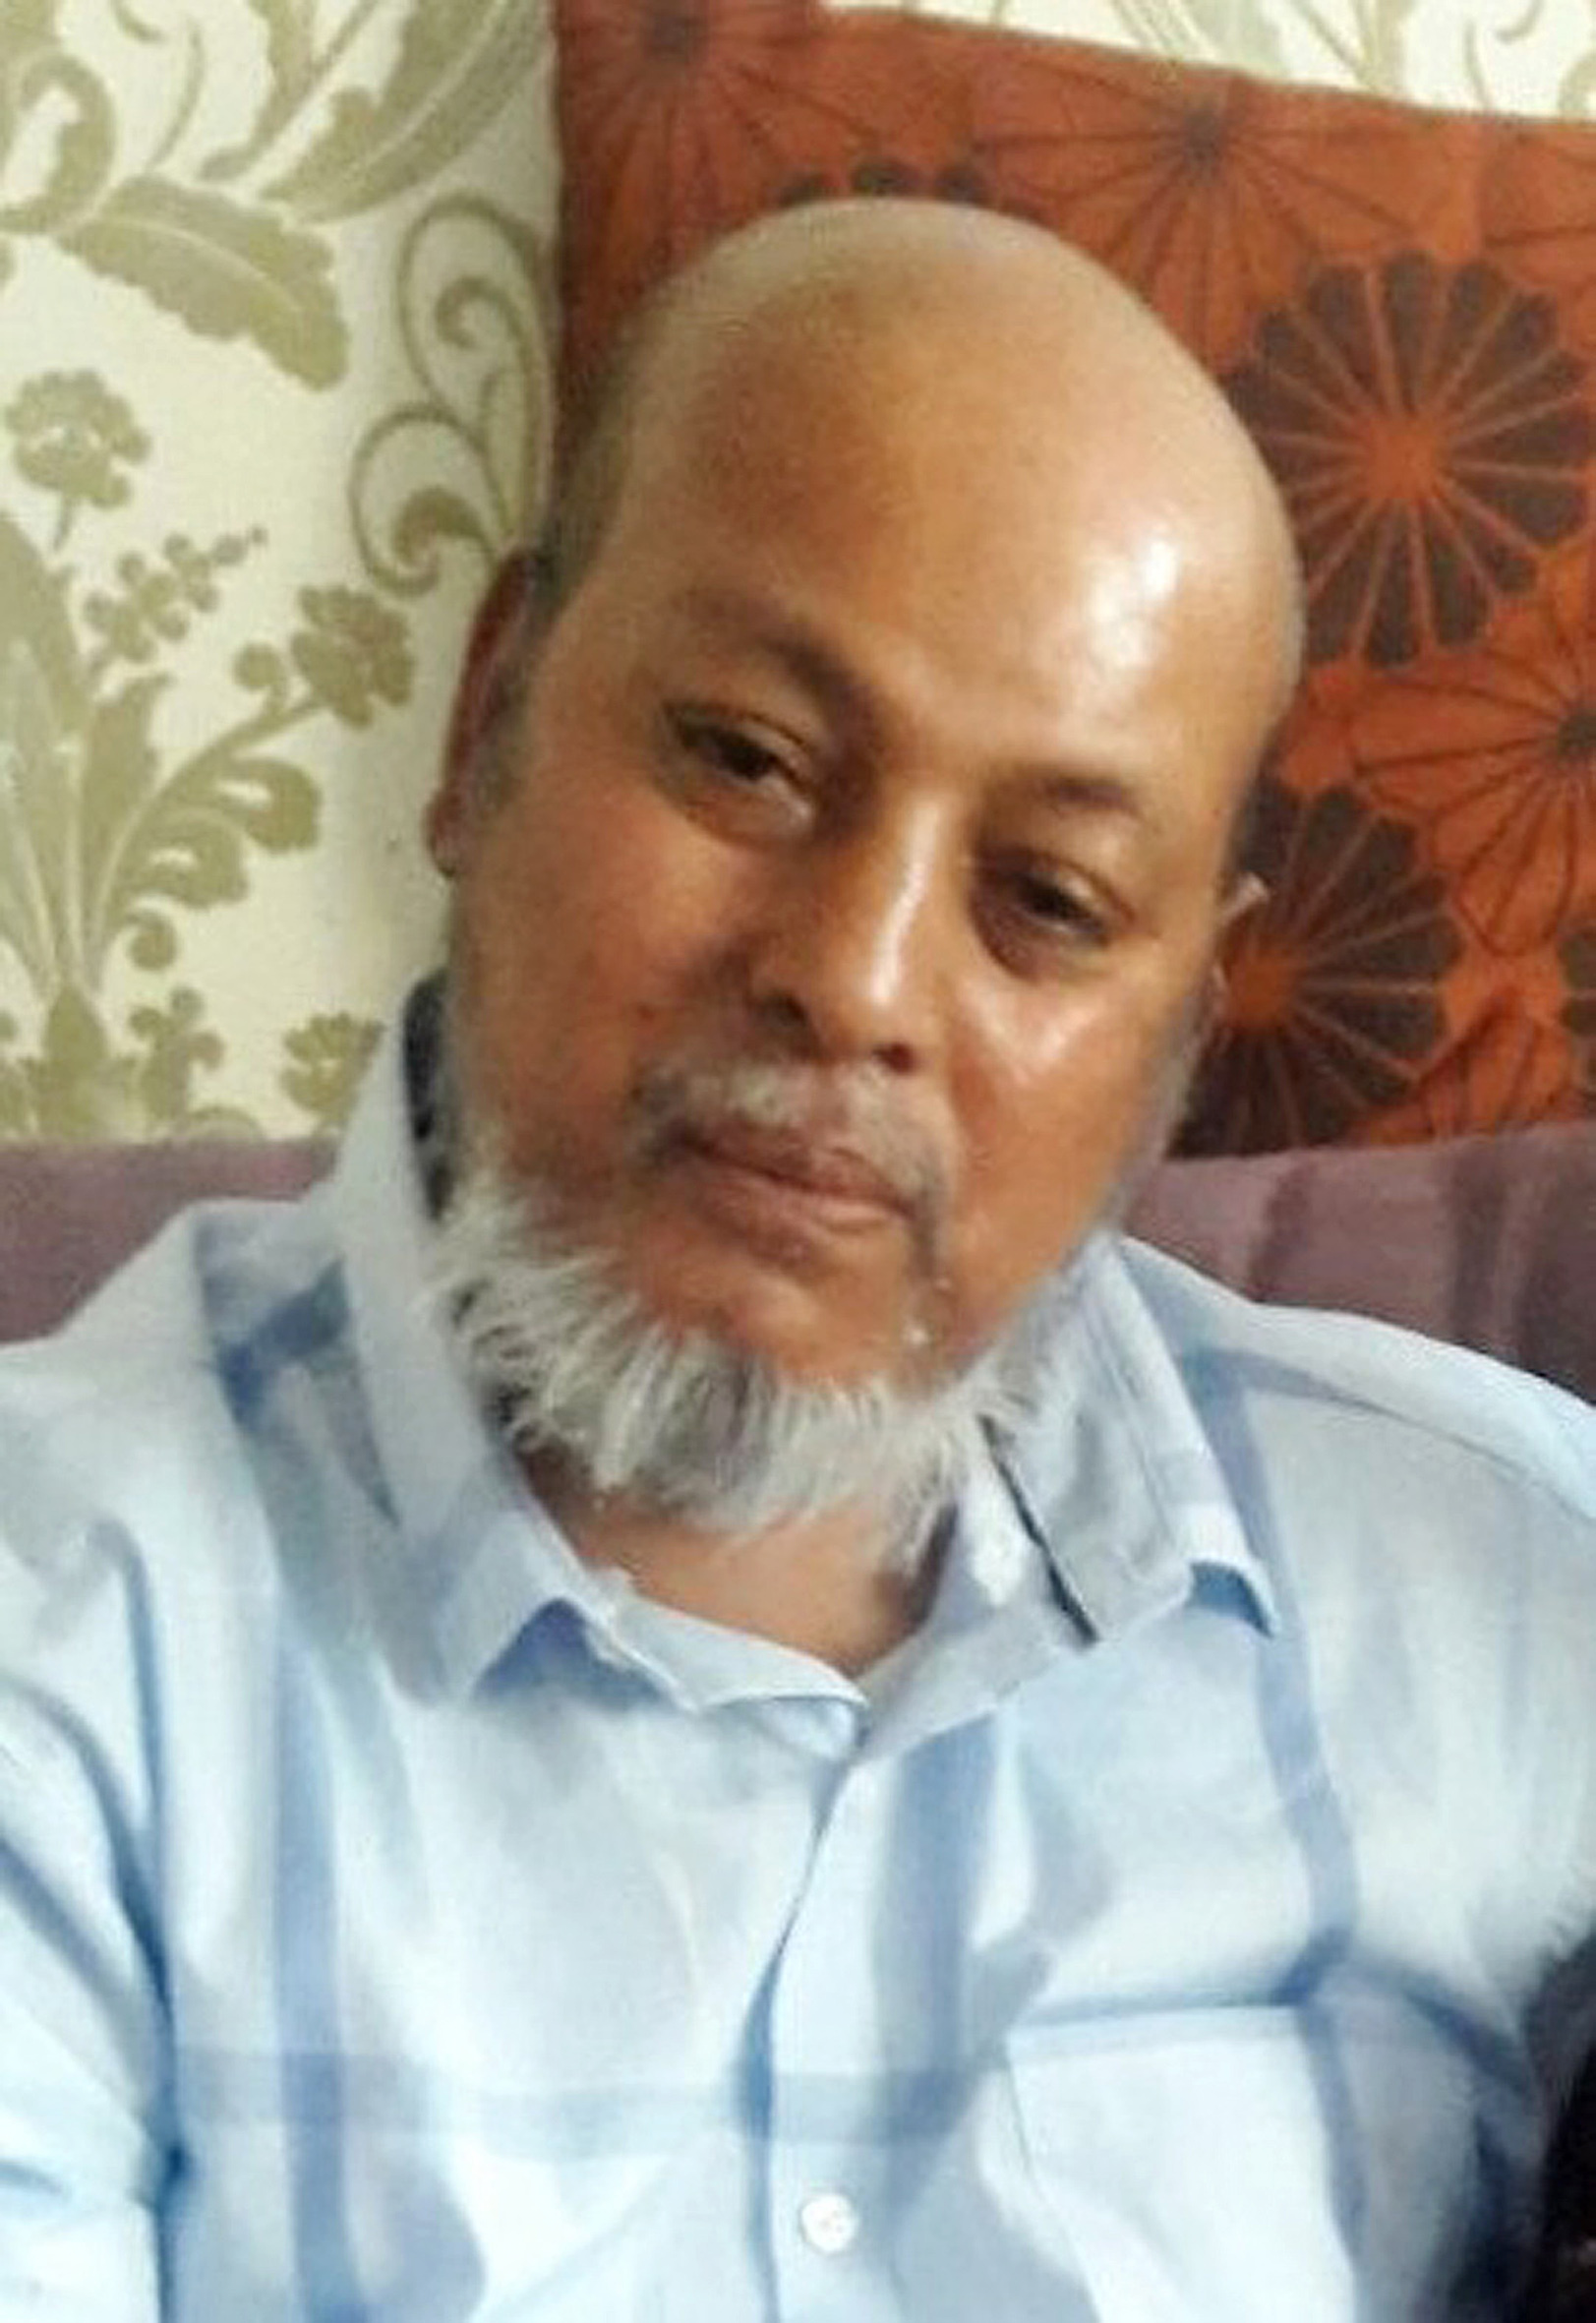 Married grandad died of 'multiple injuries' after car ploughs into mosque